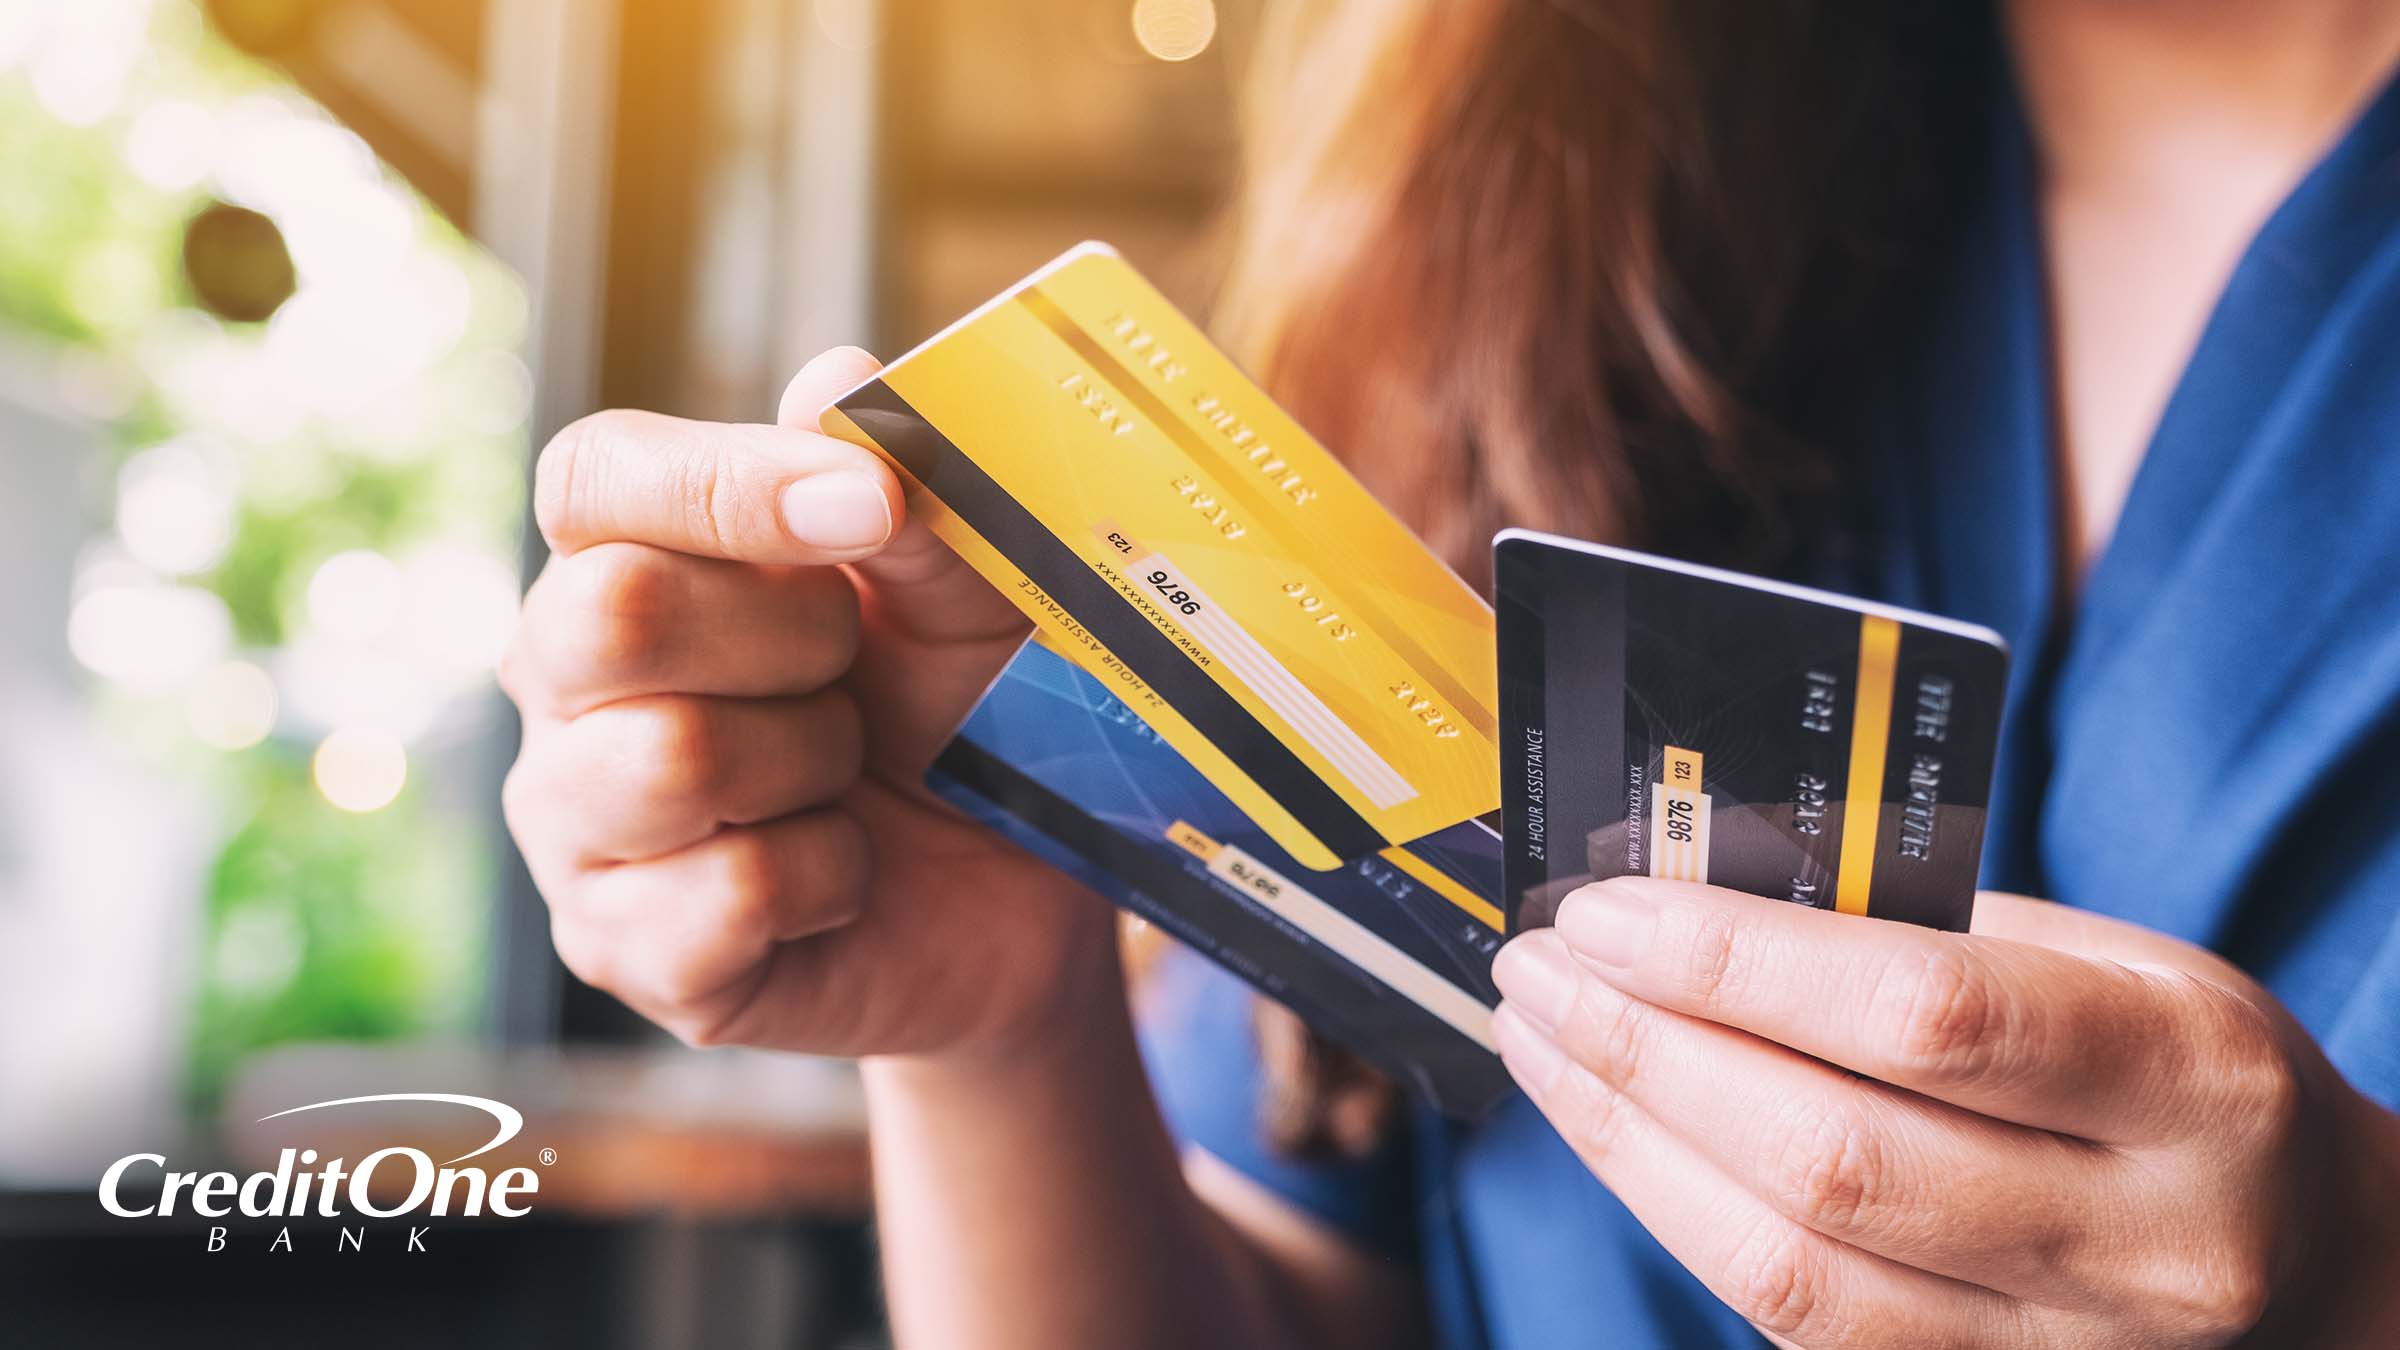 A woman holds a collection of credit and debit cards, trying to decide which to choose for her purchase.